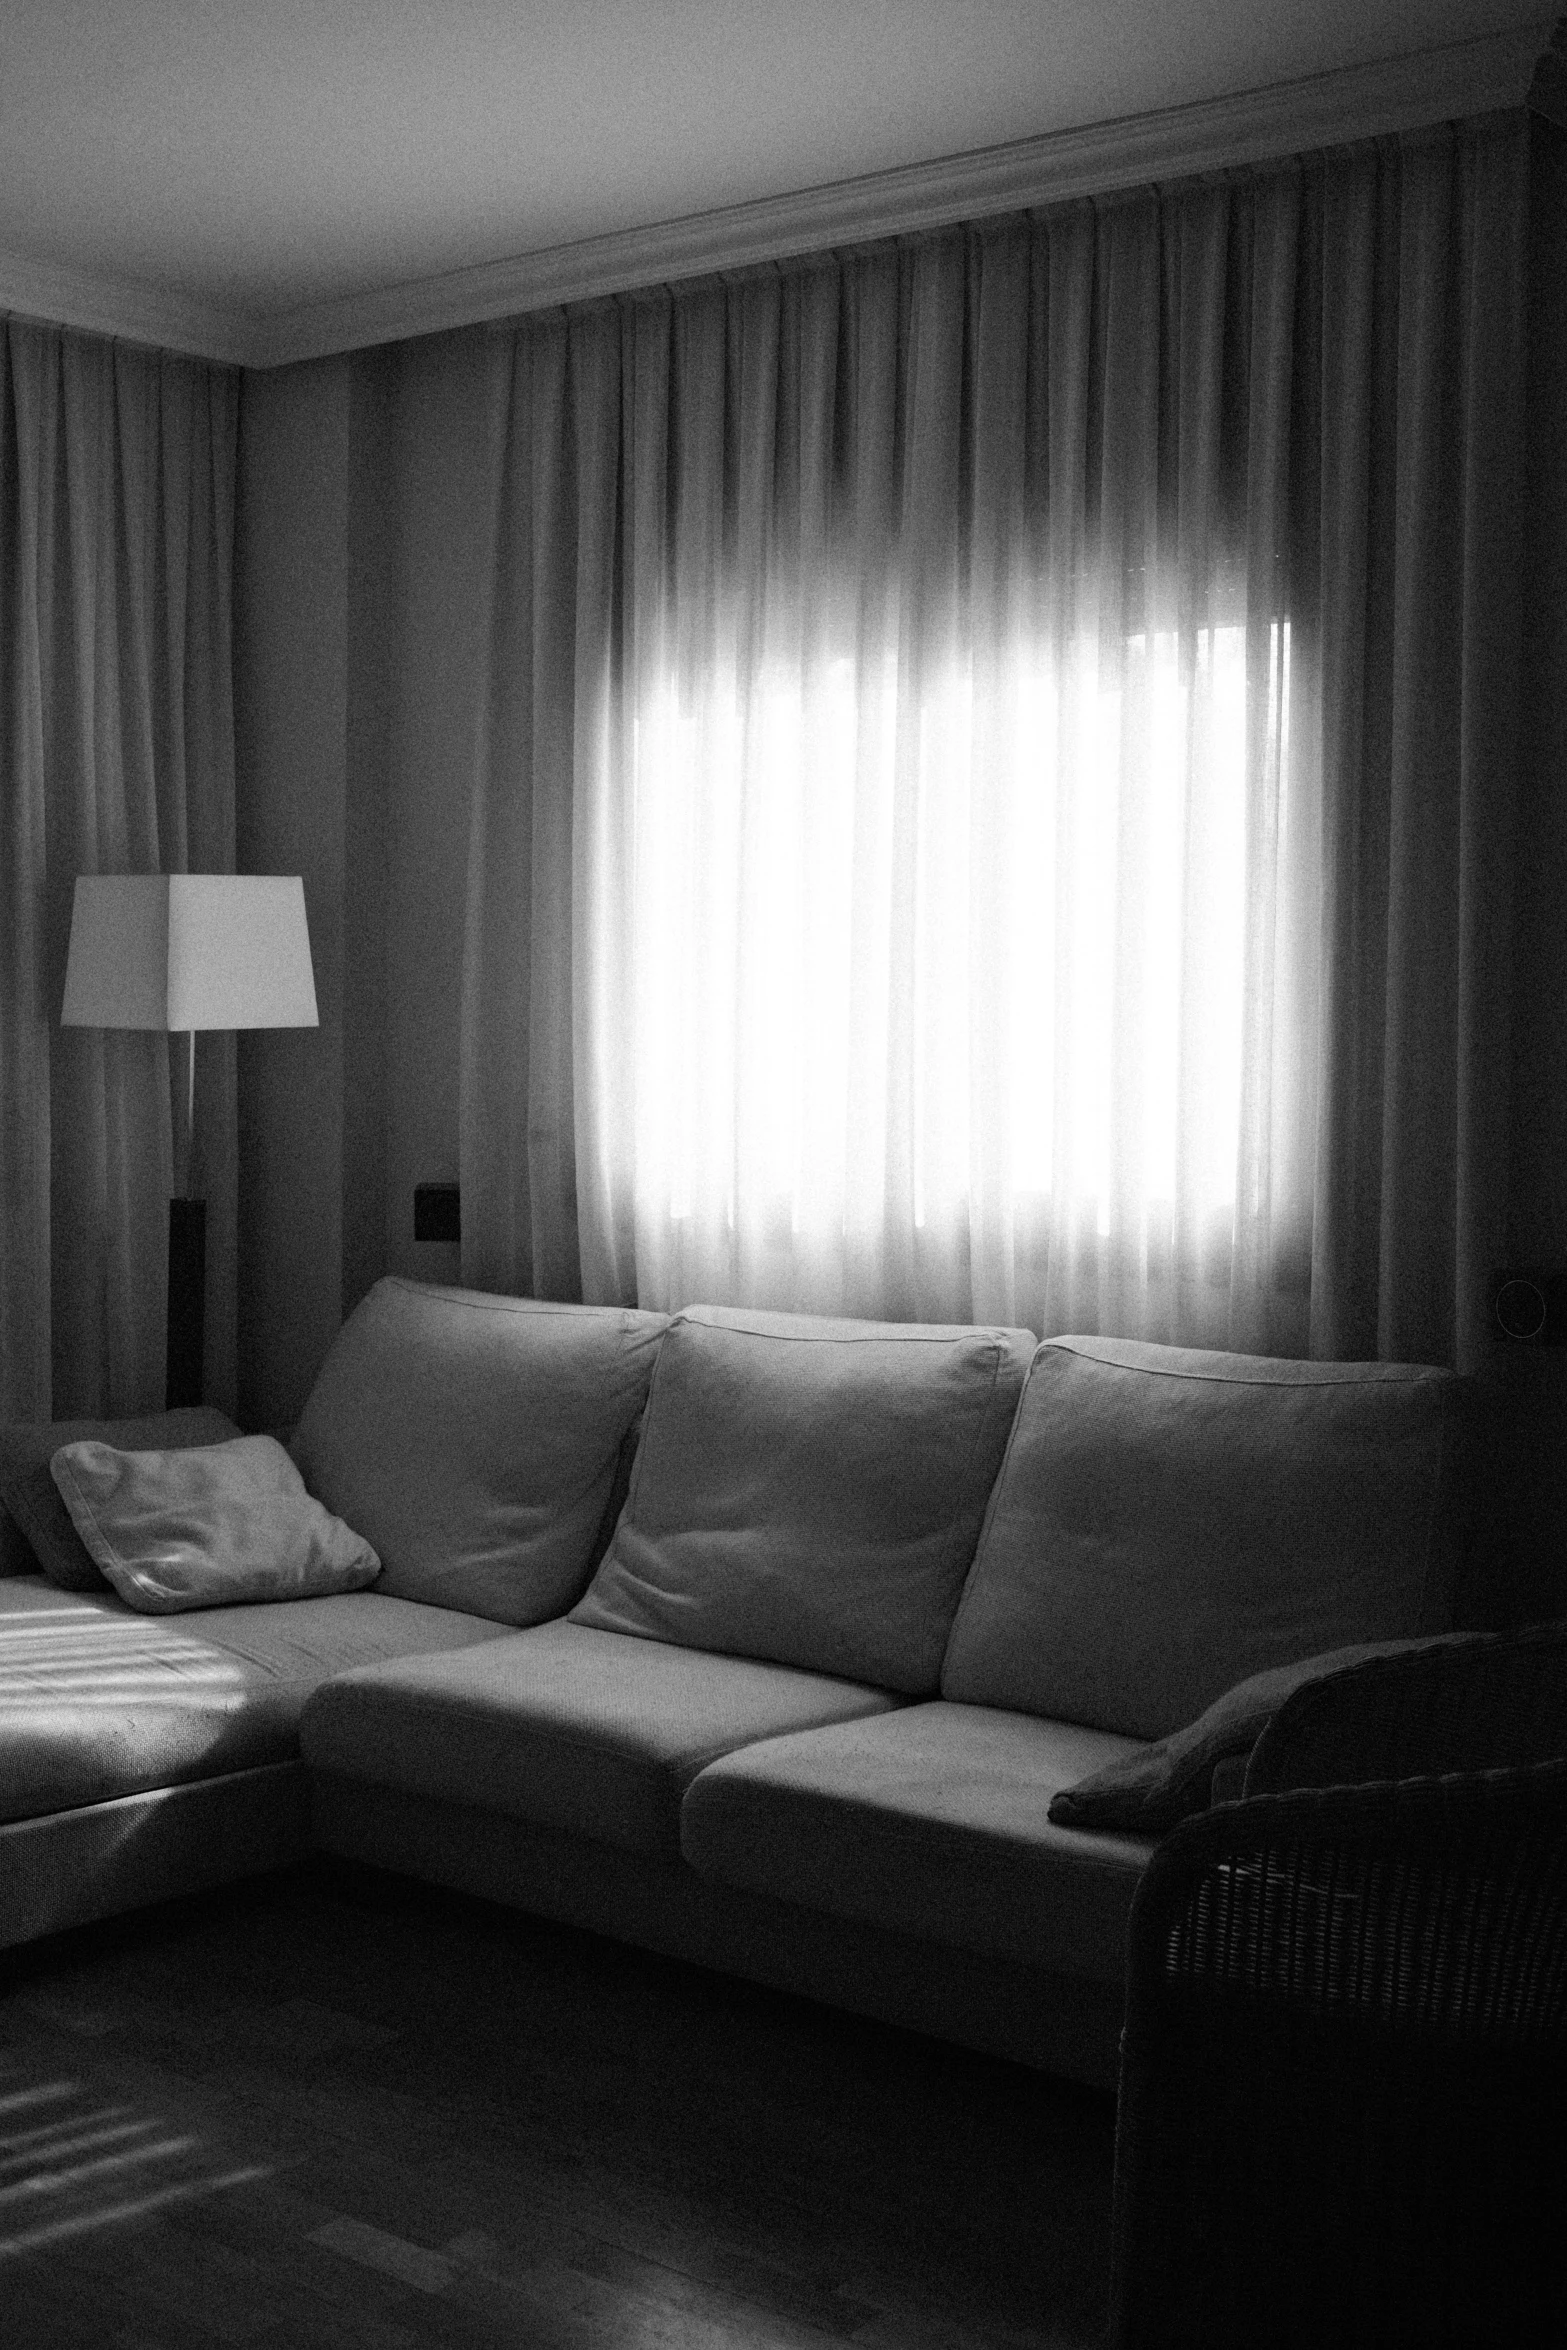 a black and white photo of a living room, inspired by Josep Rovira Soler, soft lighting album cover, curtains, morning atmosphere, sofa